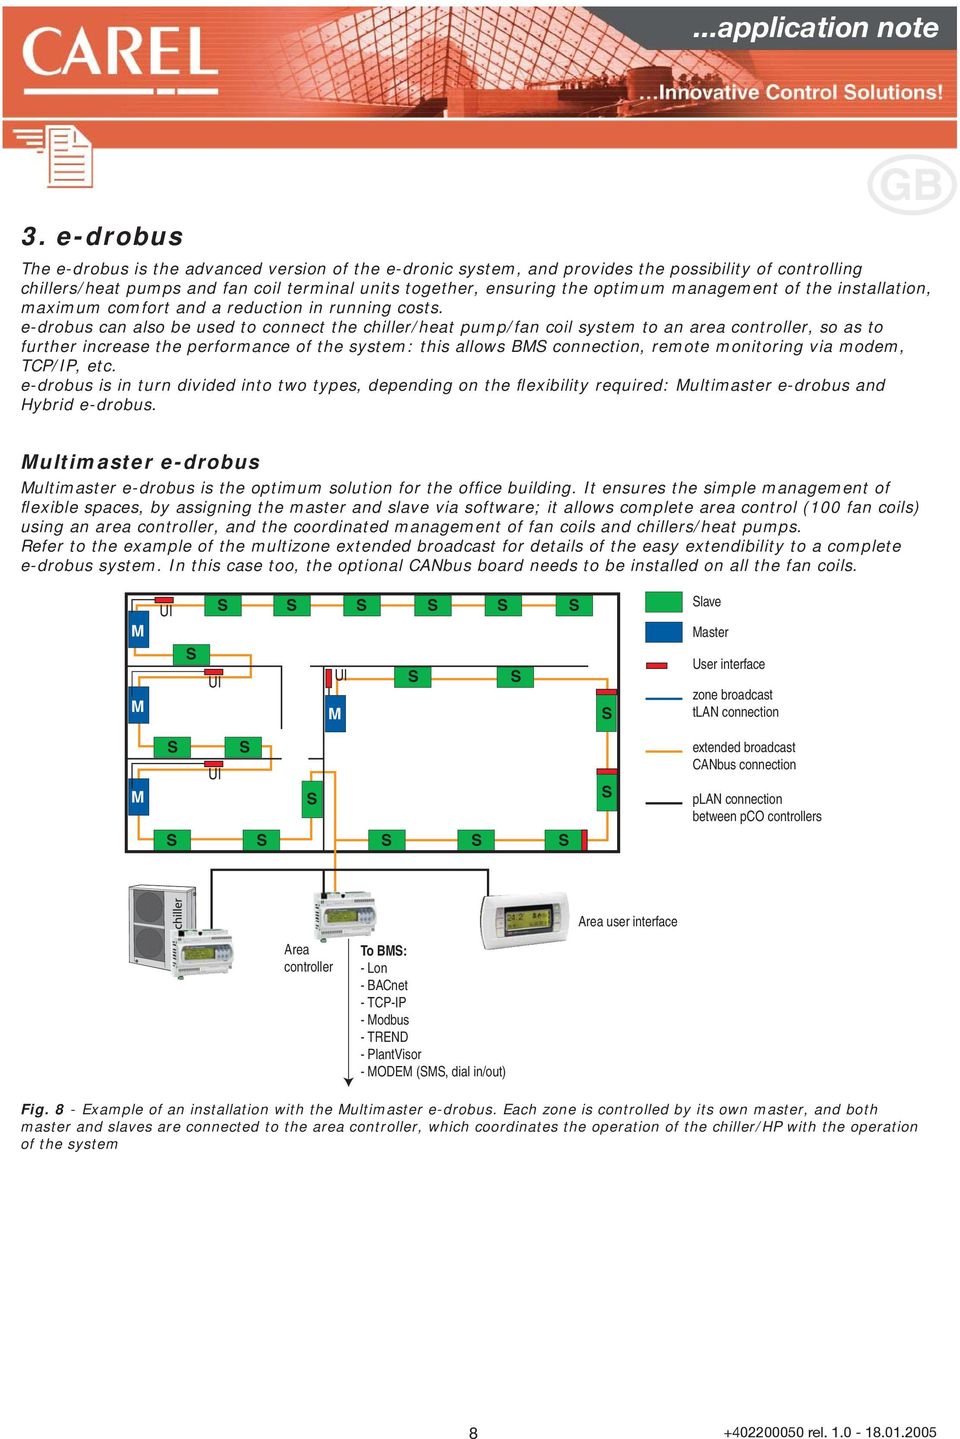 e-drobus can also be used to connect the chiller/heat pump/fan coil system to an area controller, so as to further increase the performance of the system: this allows B connection, remote monitoring